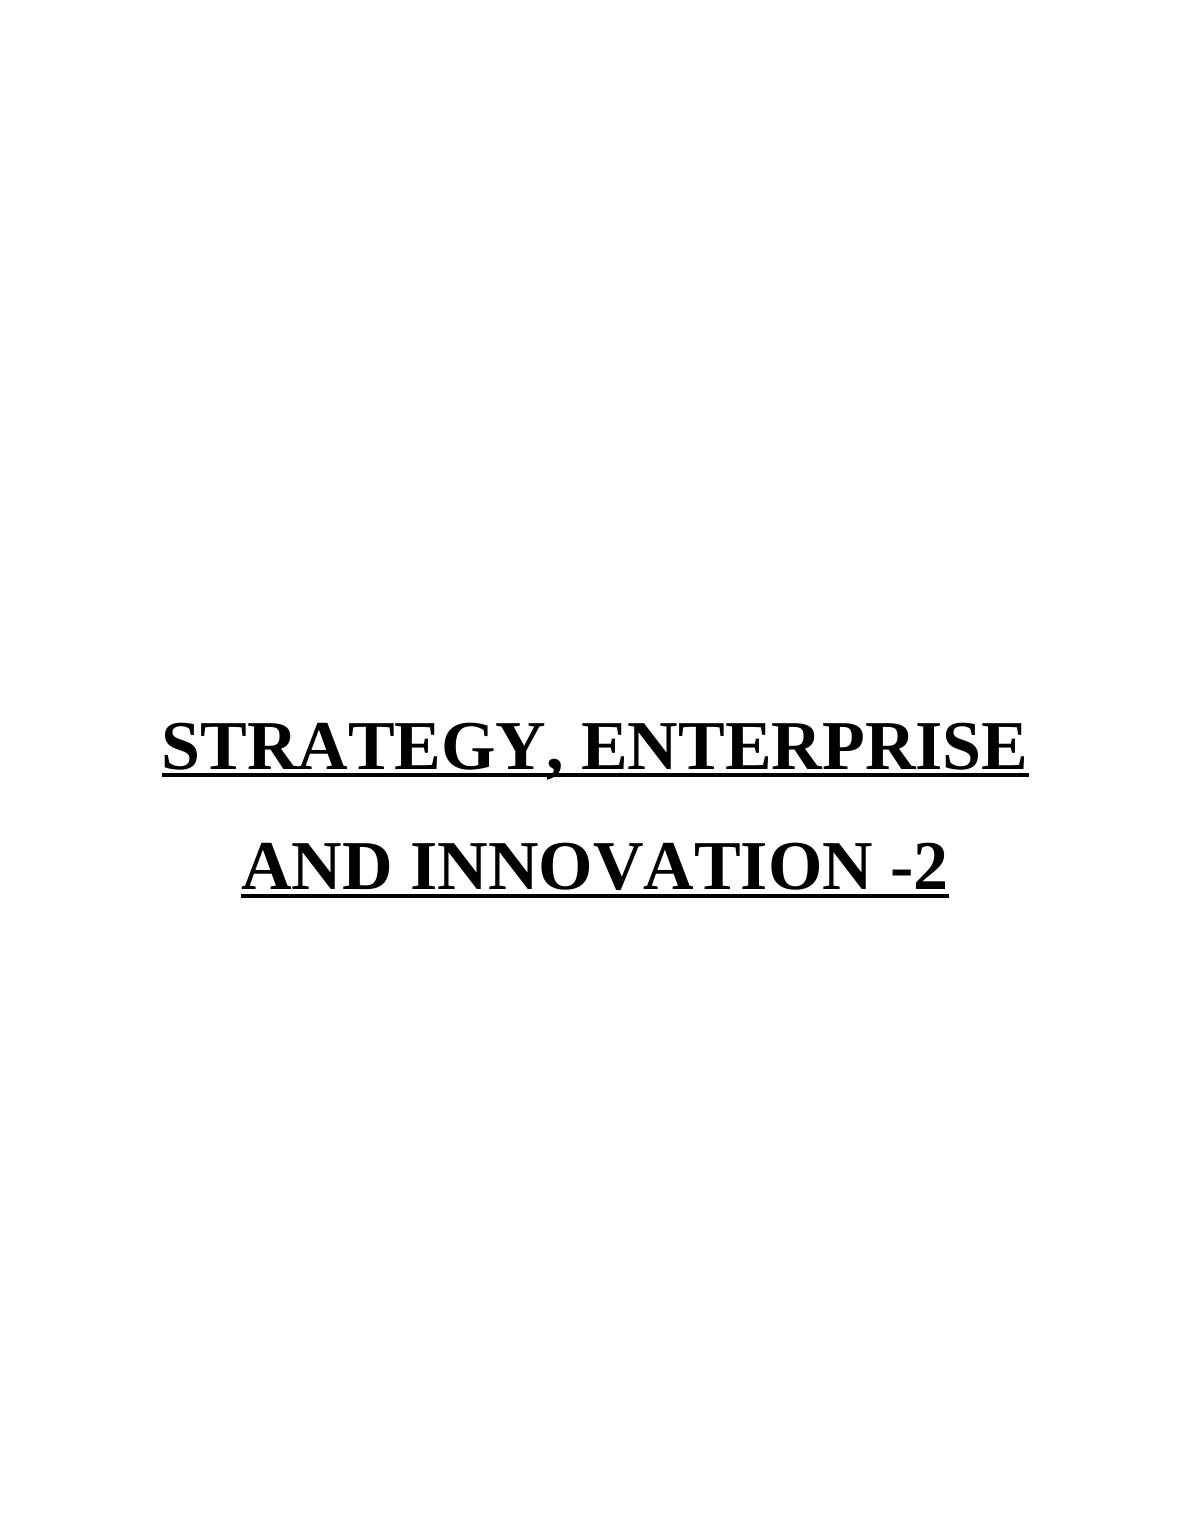 Strategy, Enterprise and Innovation -2_1